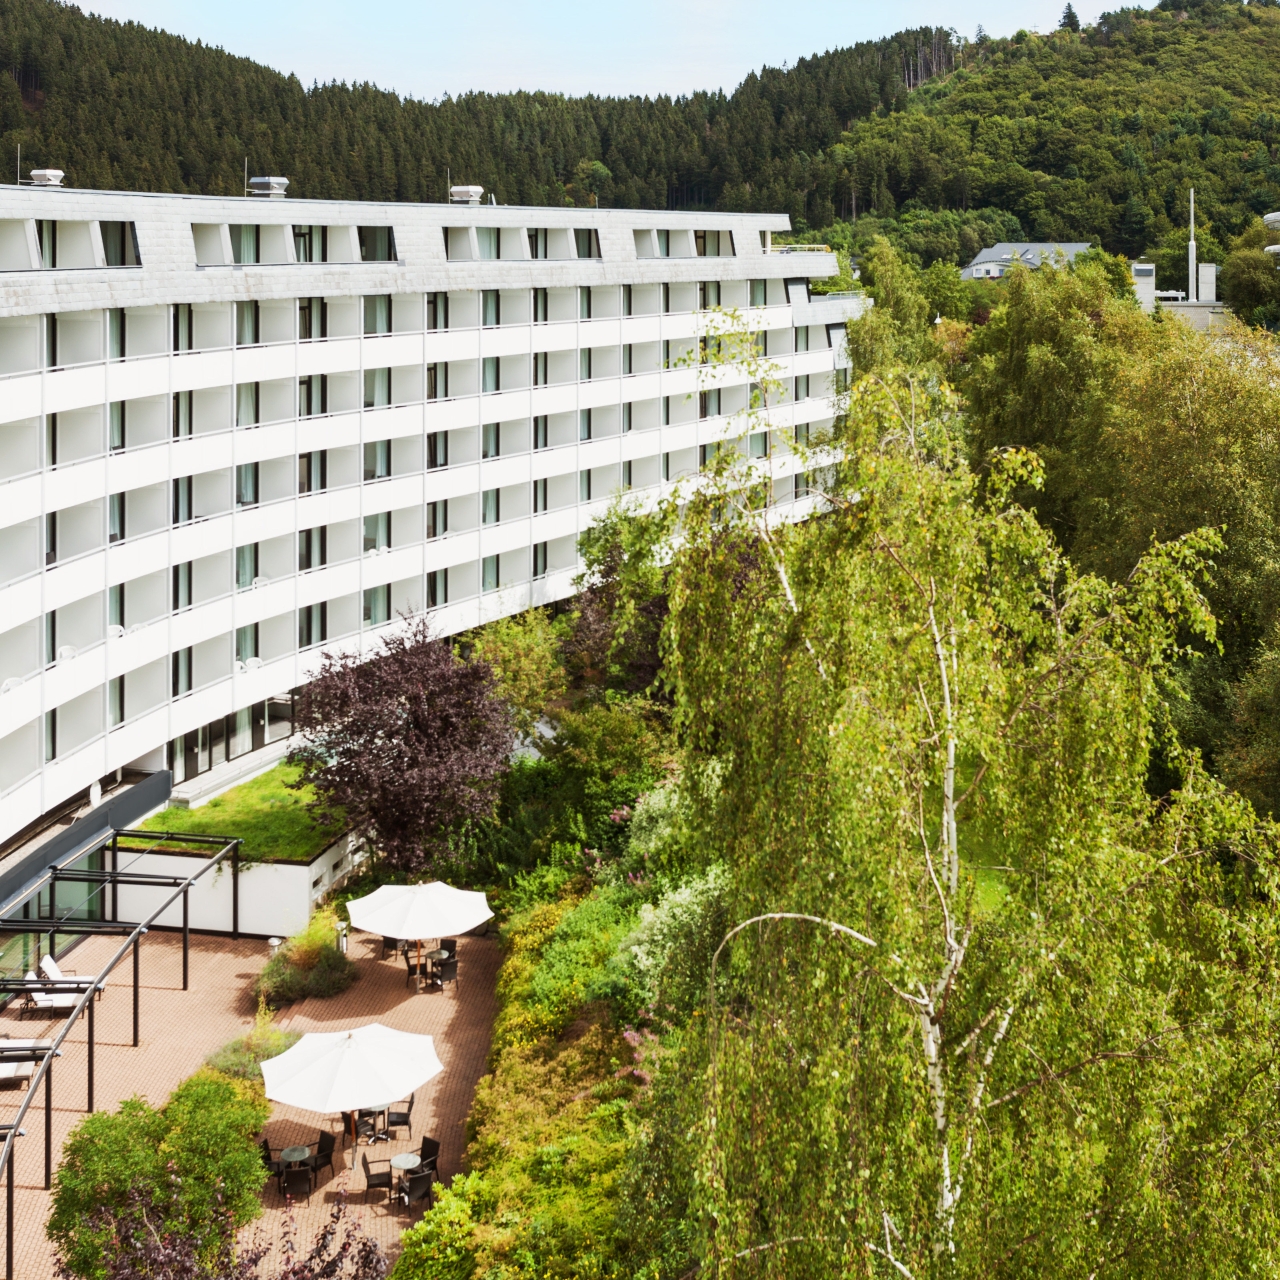 Sauerland Stern Hotel Hesse At Hrs With Free Services